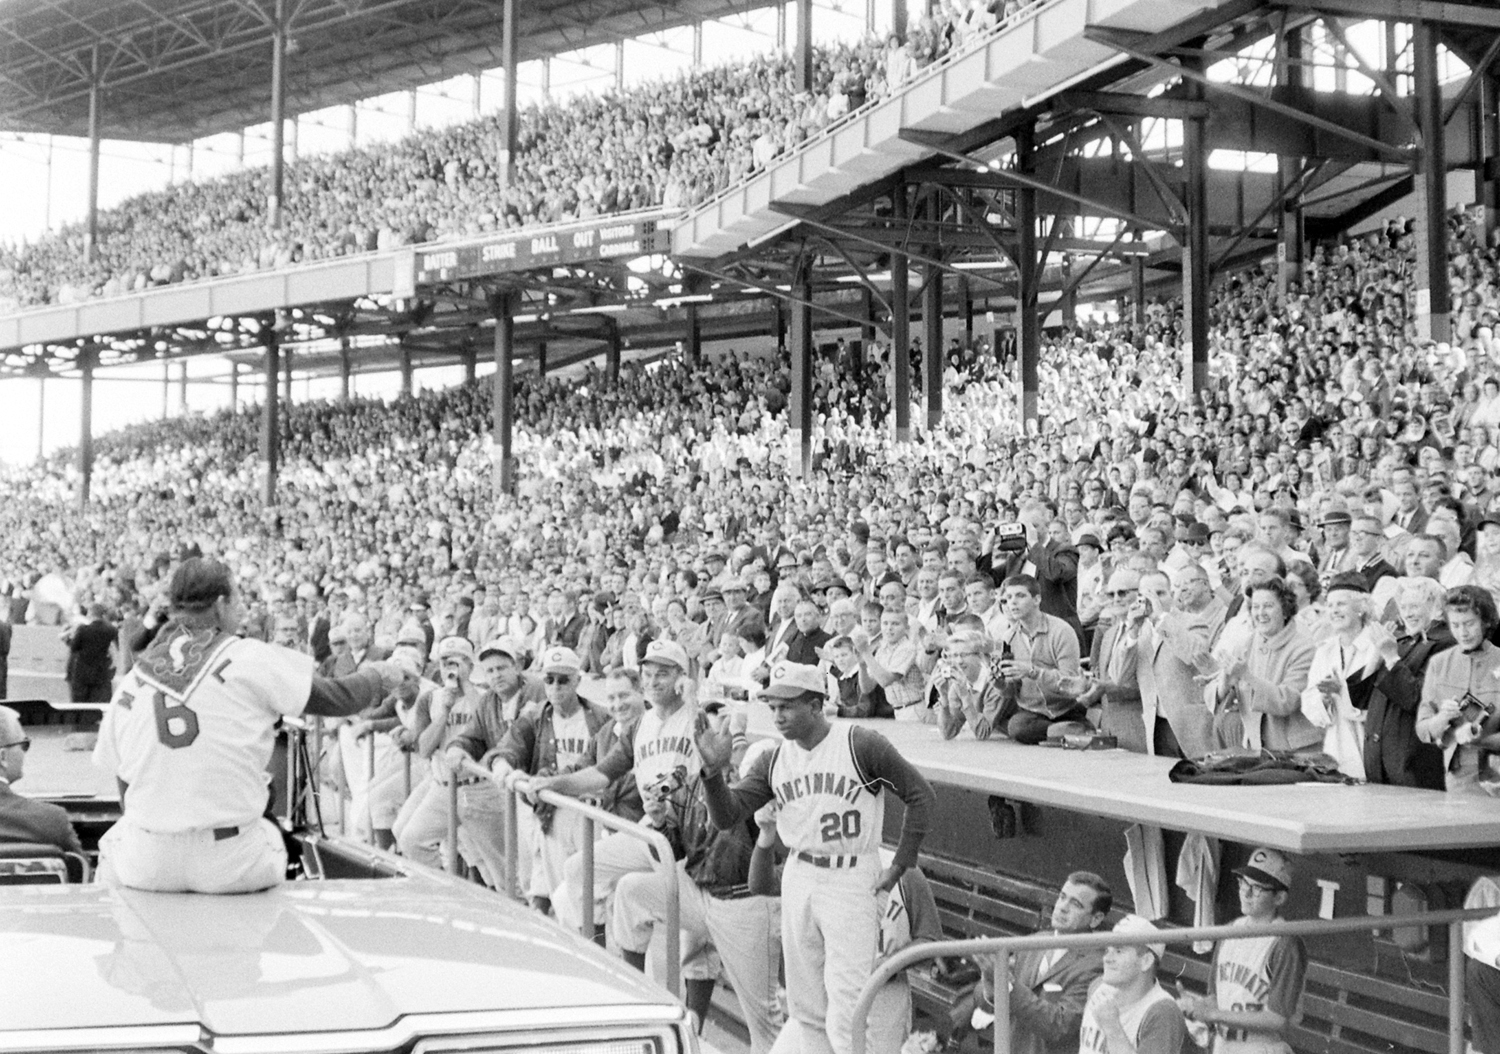 Fans, teammates and opponents (the Cincinnati Reds) applaud Stan Musial as he takes a farewell ride around the ballpark on his last day in the majors, September 29, 1963.